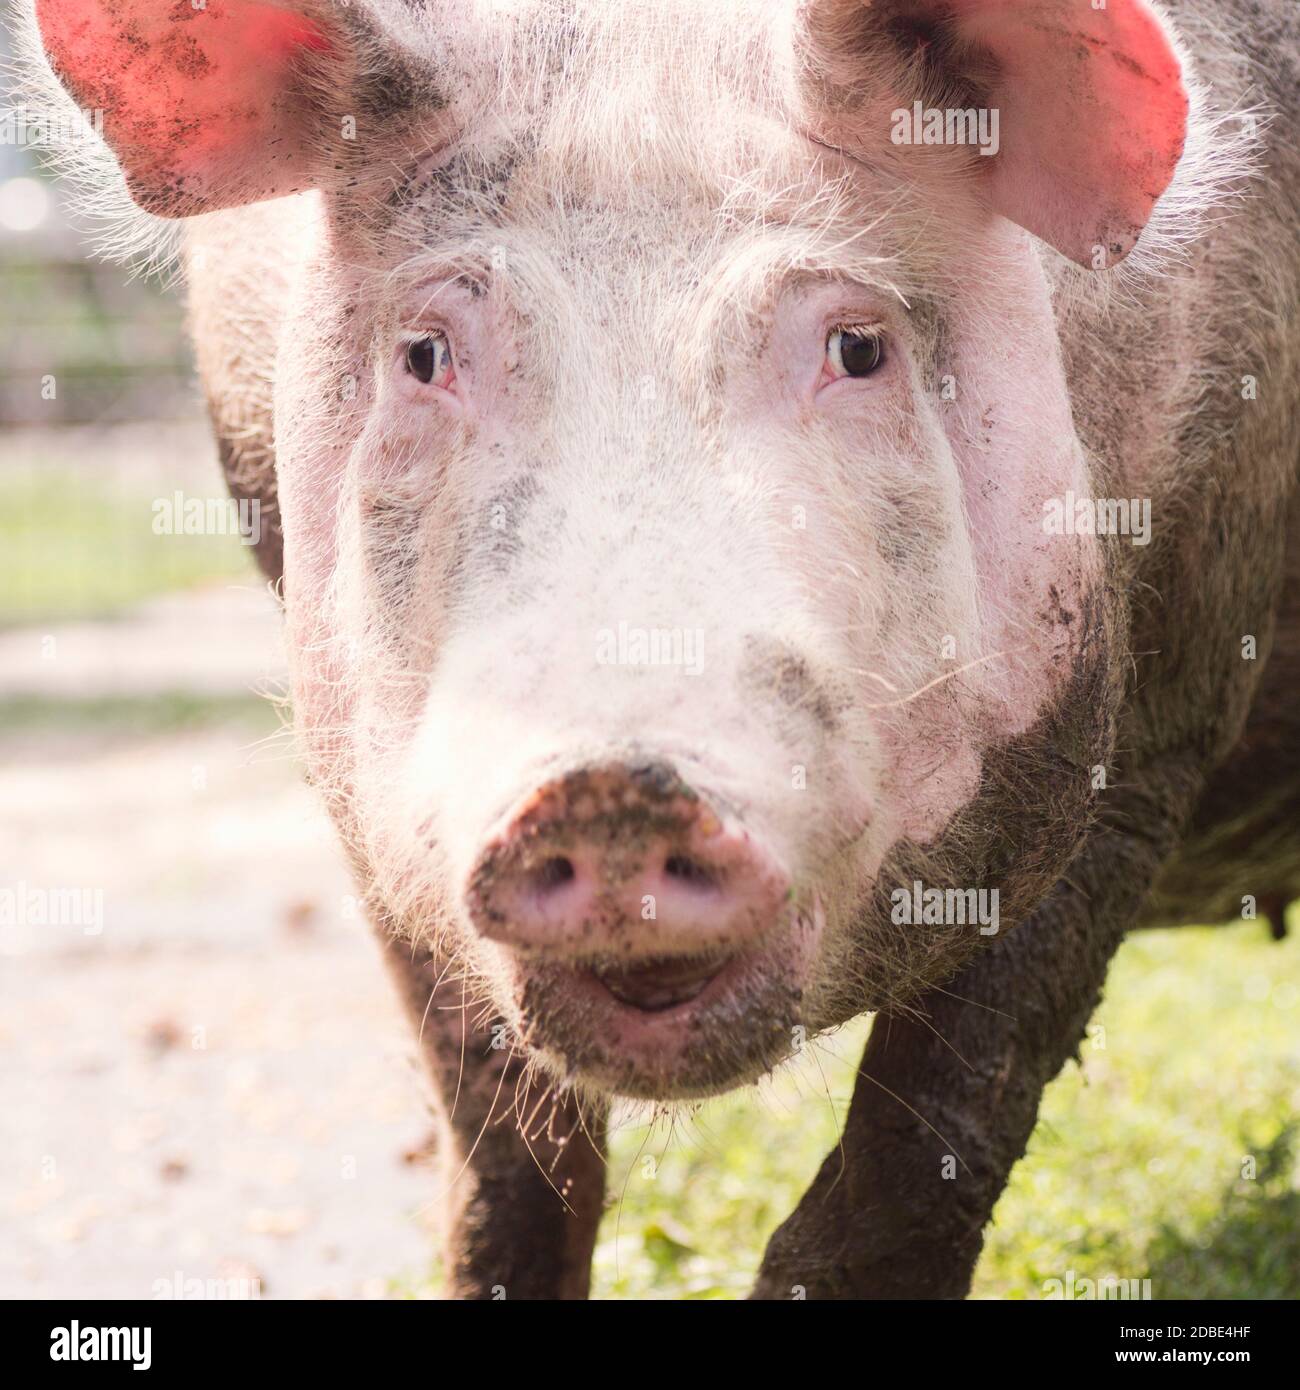 Front view animal portrait of dirty big domestic pig, pig breeding and agriculture concept. Stock Photo